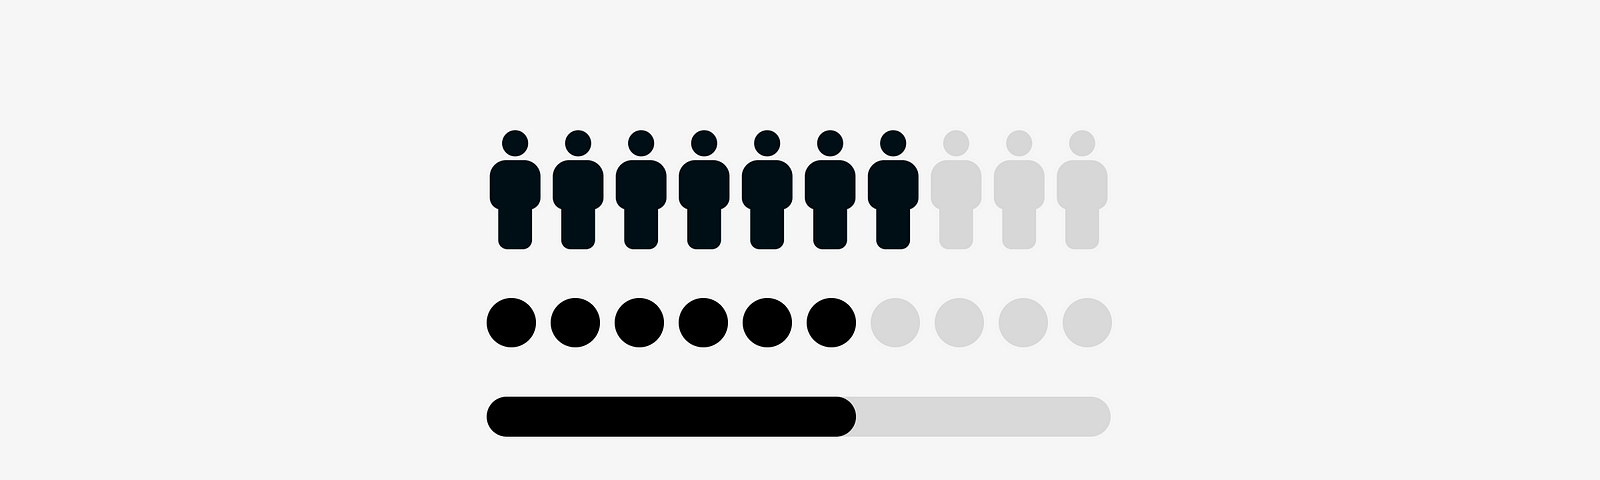 Four different ways of visualizing progress — using human icons, dots, bar chart, and squares.